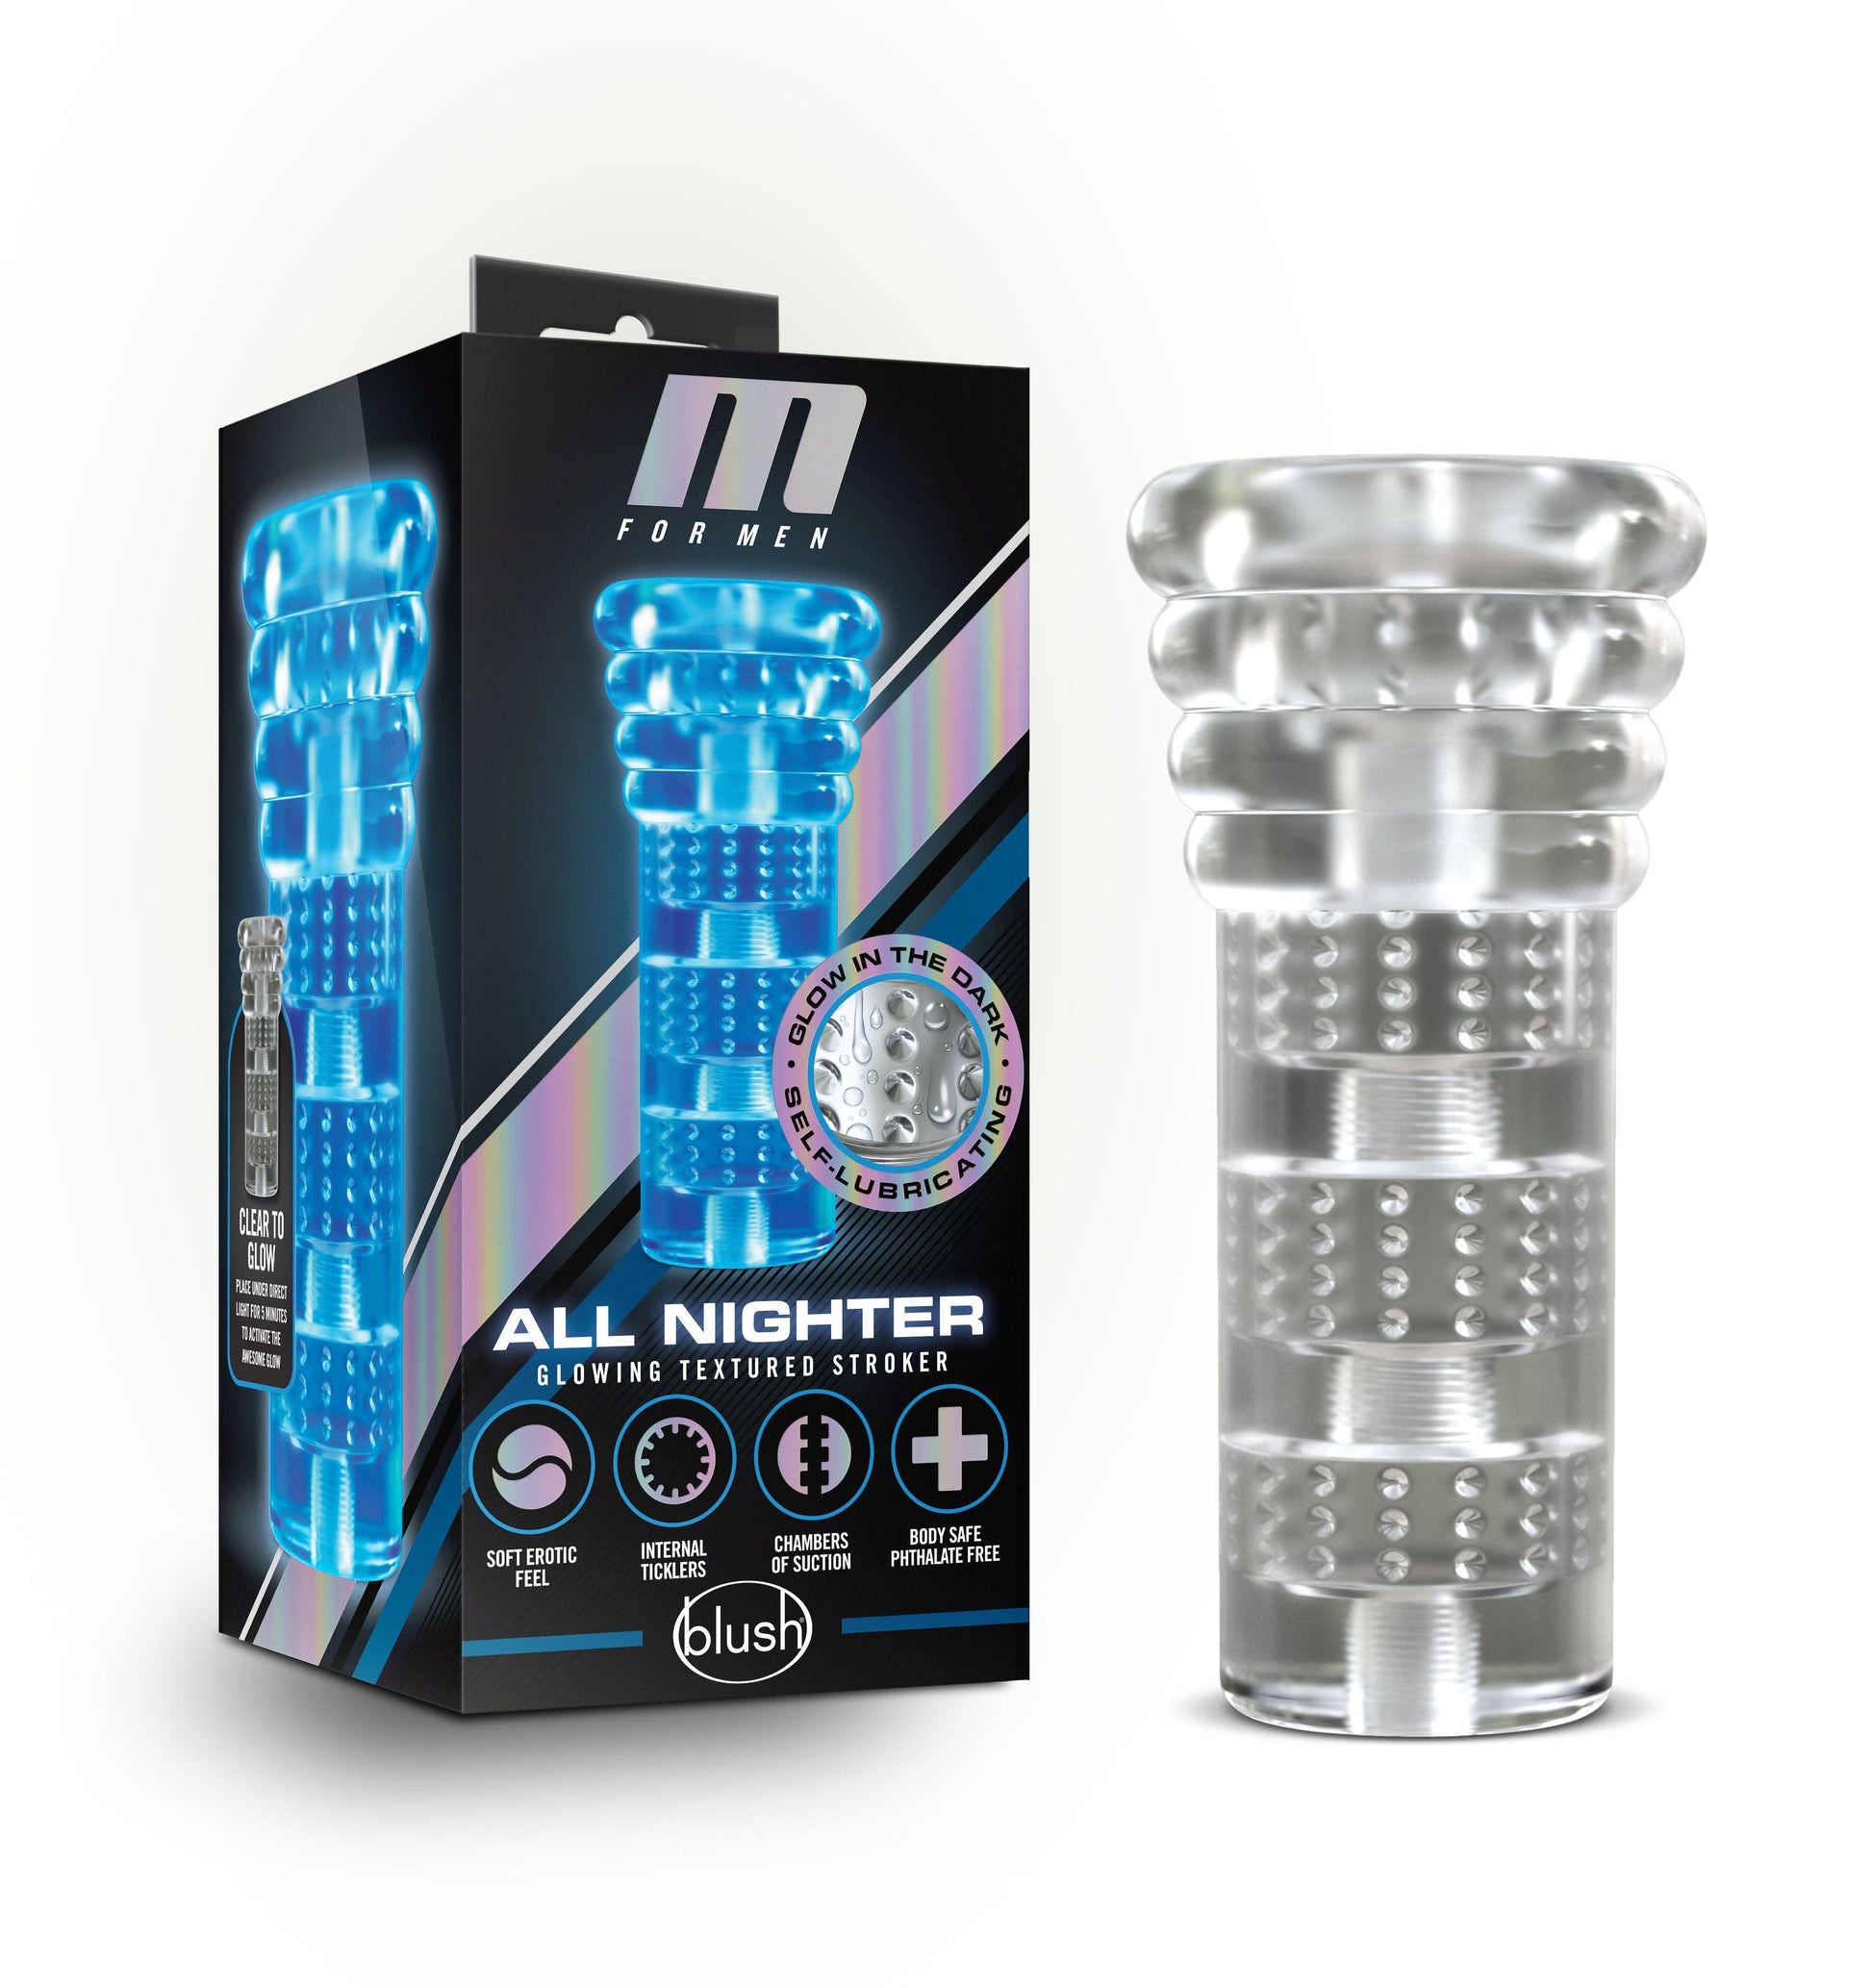 M for Men - Soft and Wet - All Nighter - Clear - My Sex Toy Hub